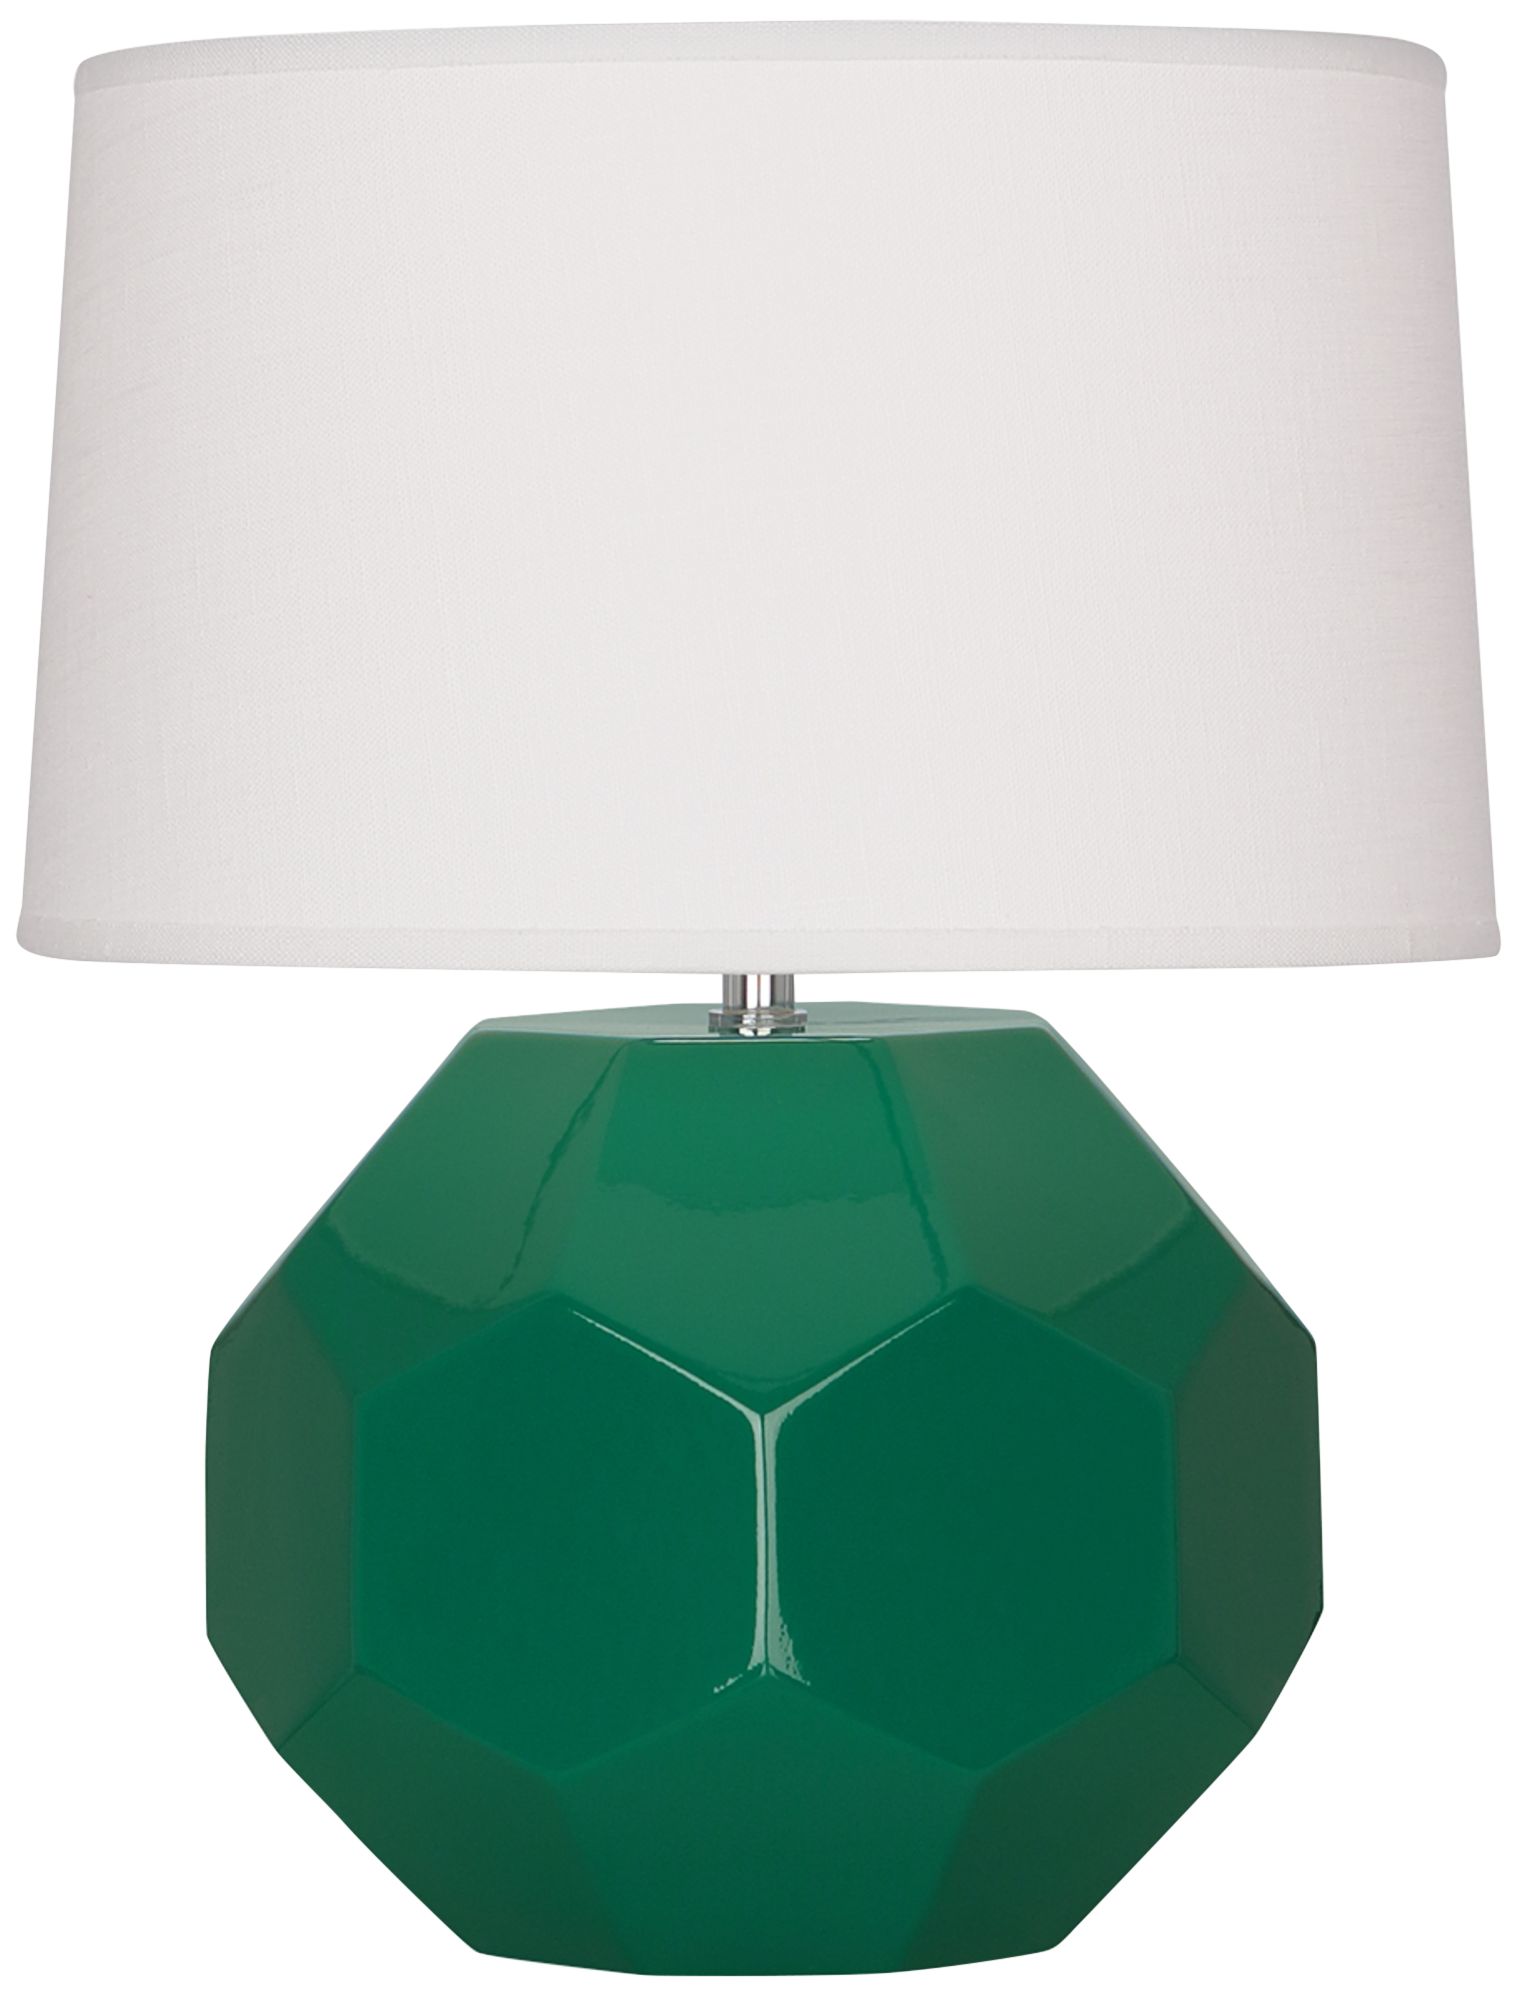 Franklin 16 1/2" High Green Glazed Ceramic Accent Table Lamp